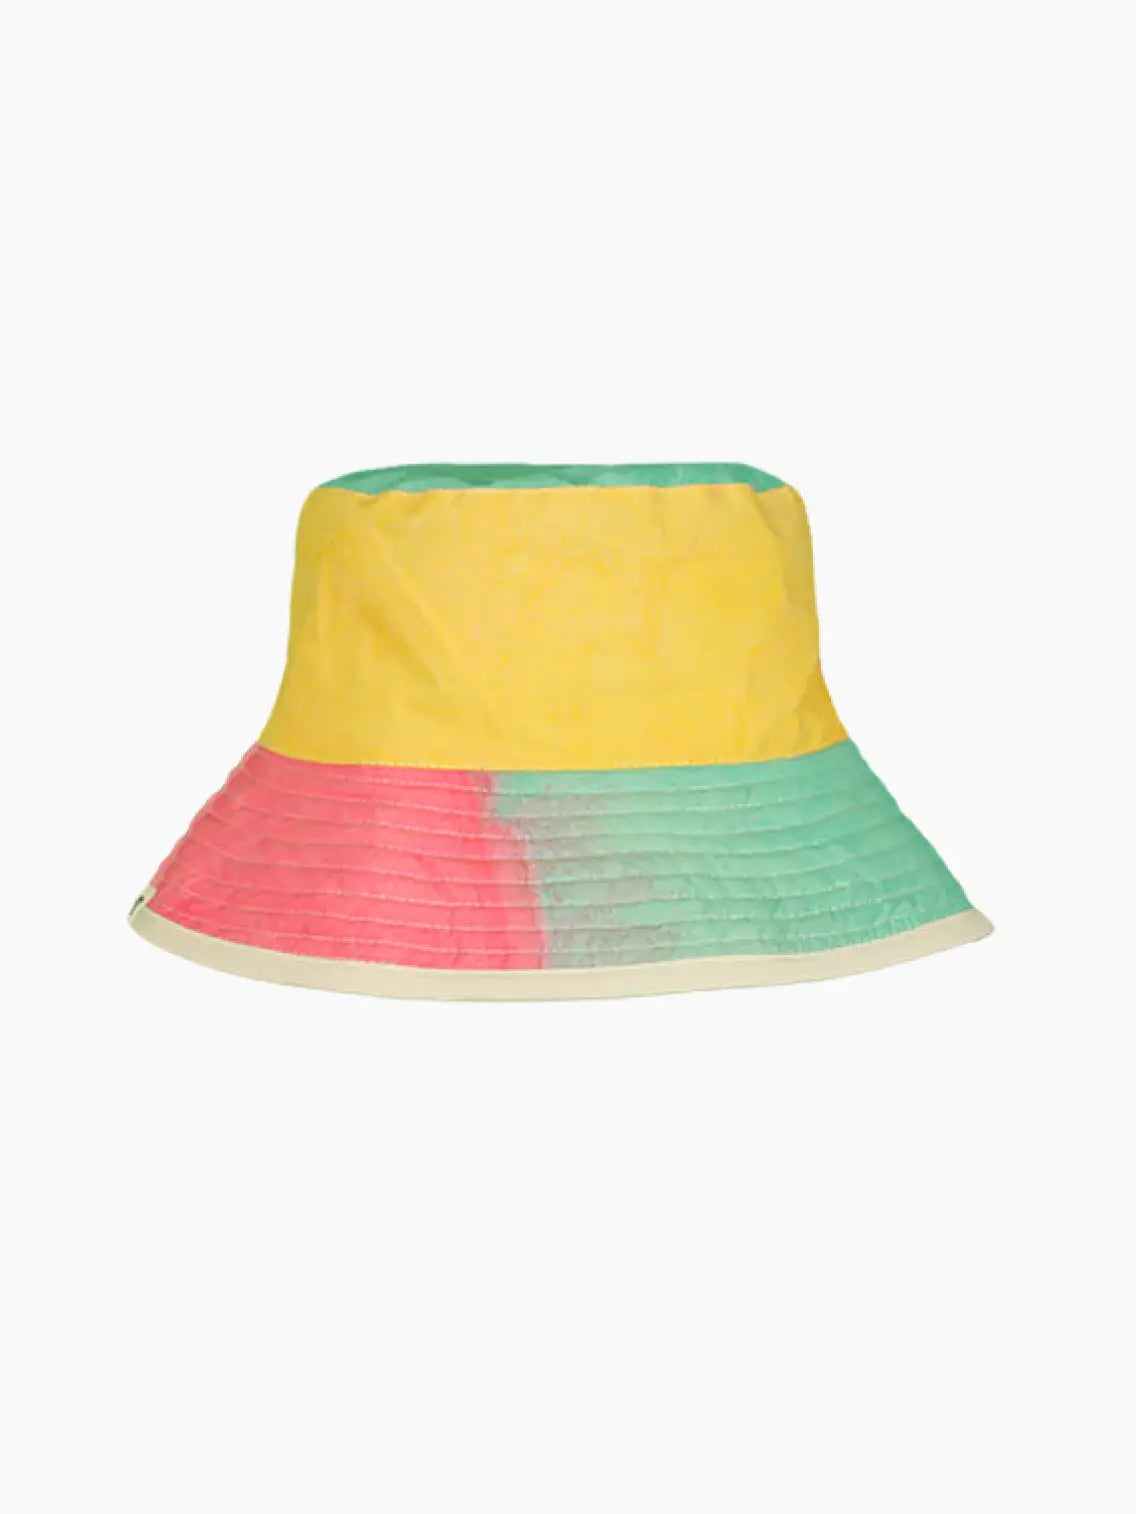 A vibrant Color Block Bucket Hat from Romualda, with three color blocks: yellow on top, red in the middle, and green at the bottom, featuring a white brim.